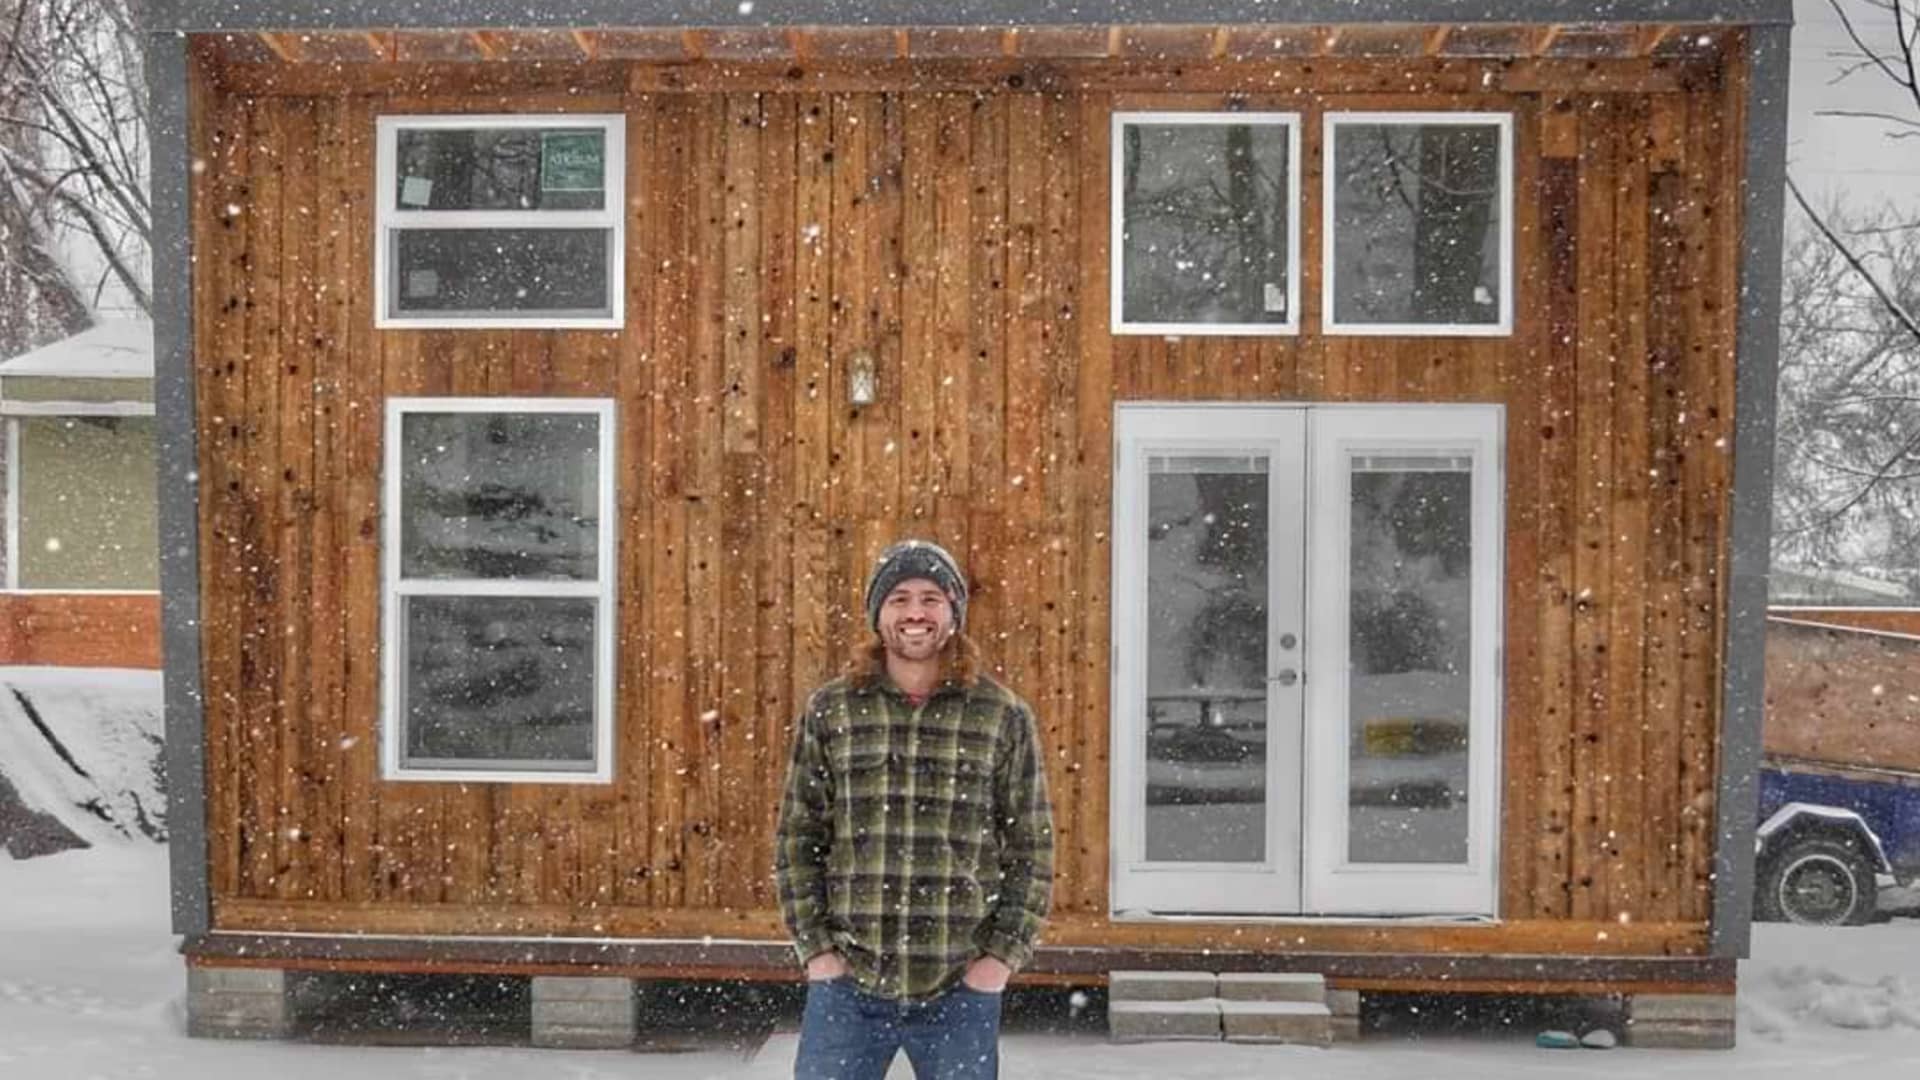 34-year-old spent $17,000 on a tiny home in Idaho—now it brings in $49,000 a year on Airbnb: It's 'almost completely passive'